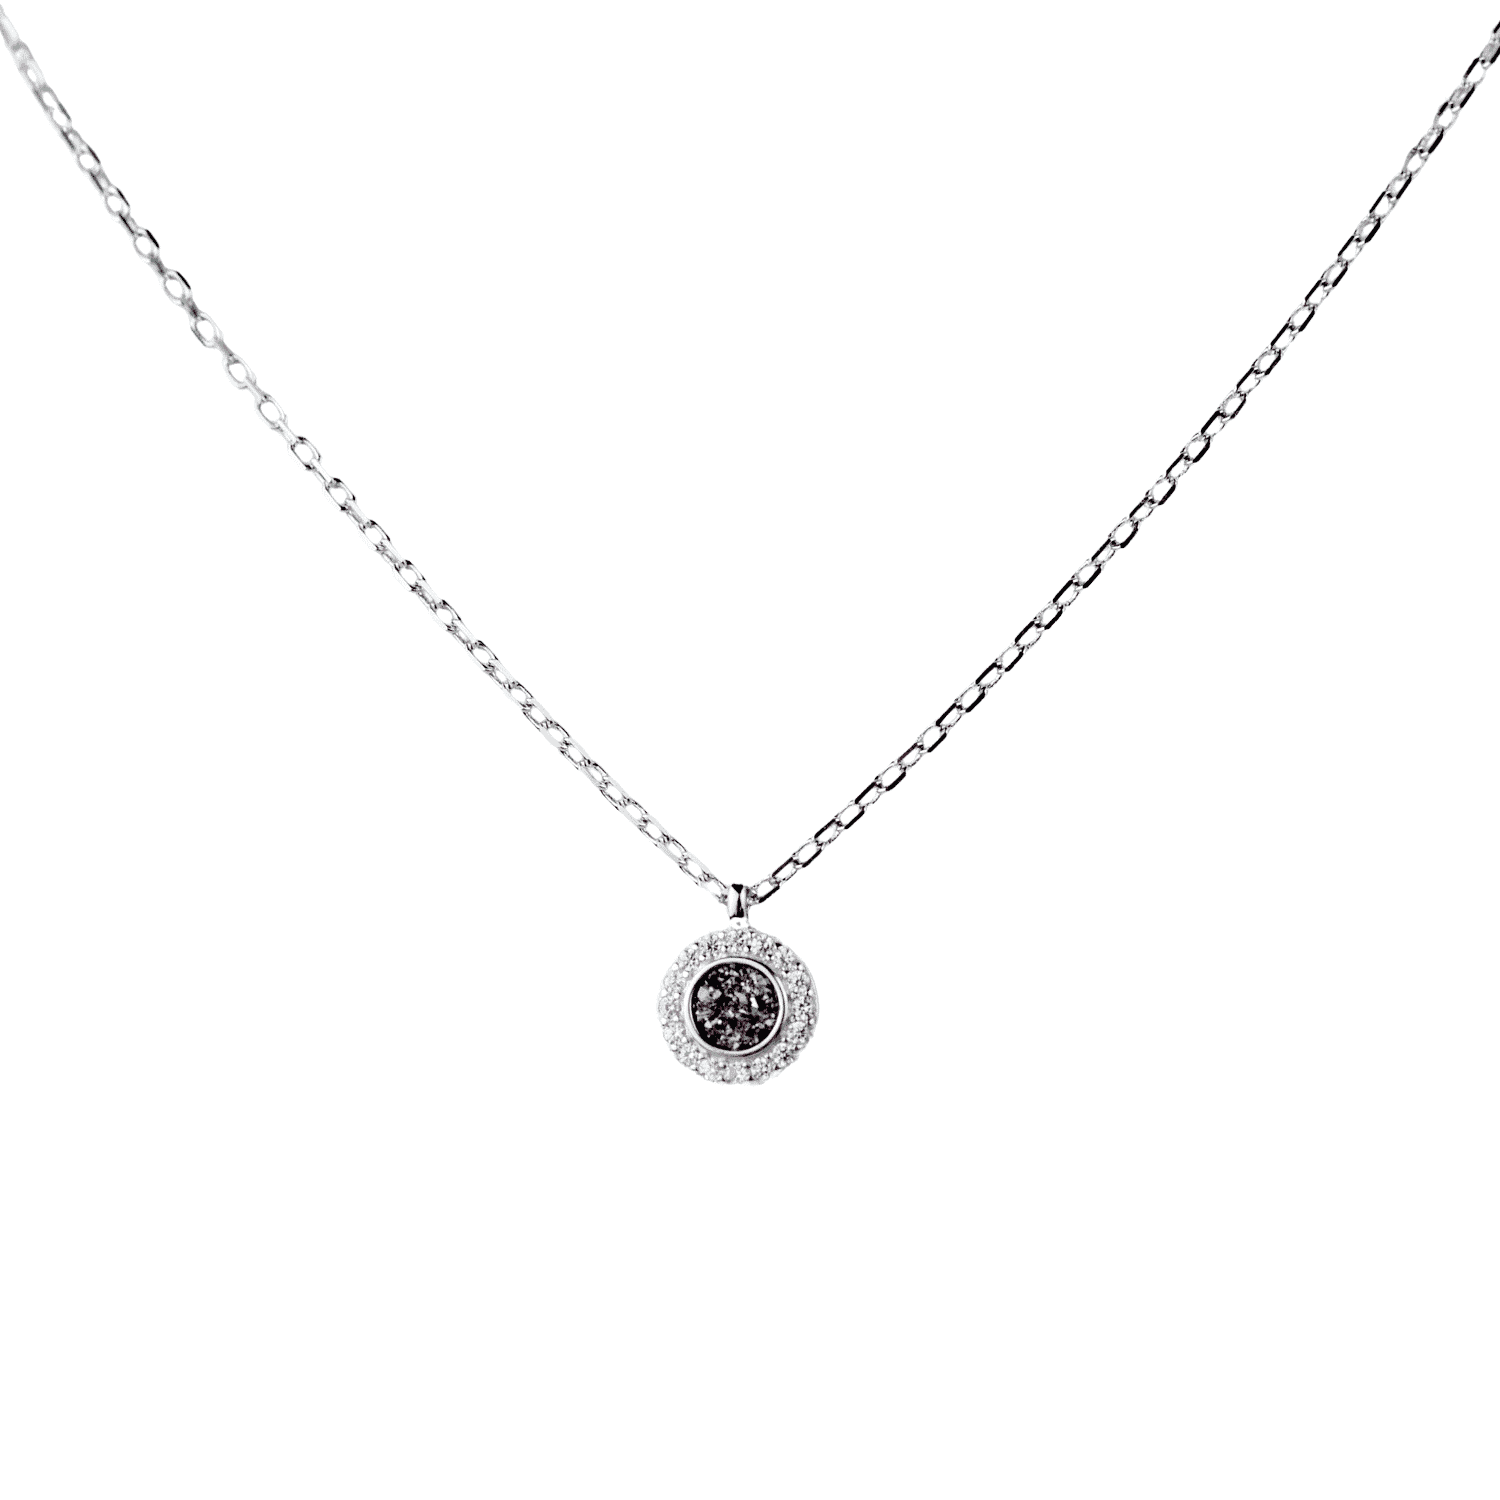 Asfour Zircon Rounded Shape 925 Sterling Silver Necklace,Clear+Black Diamond